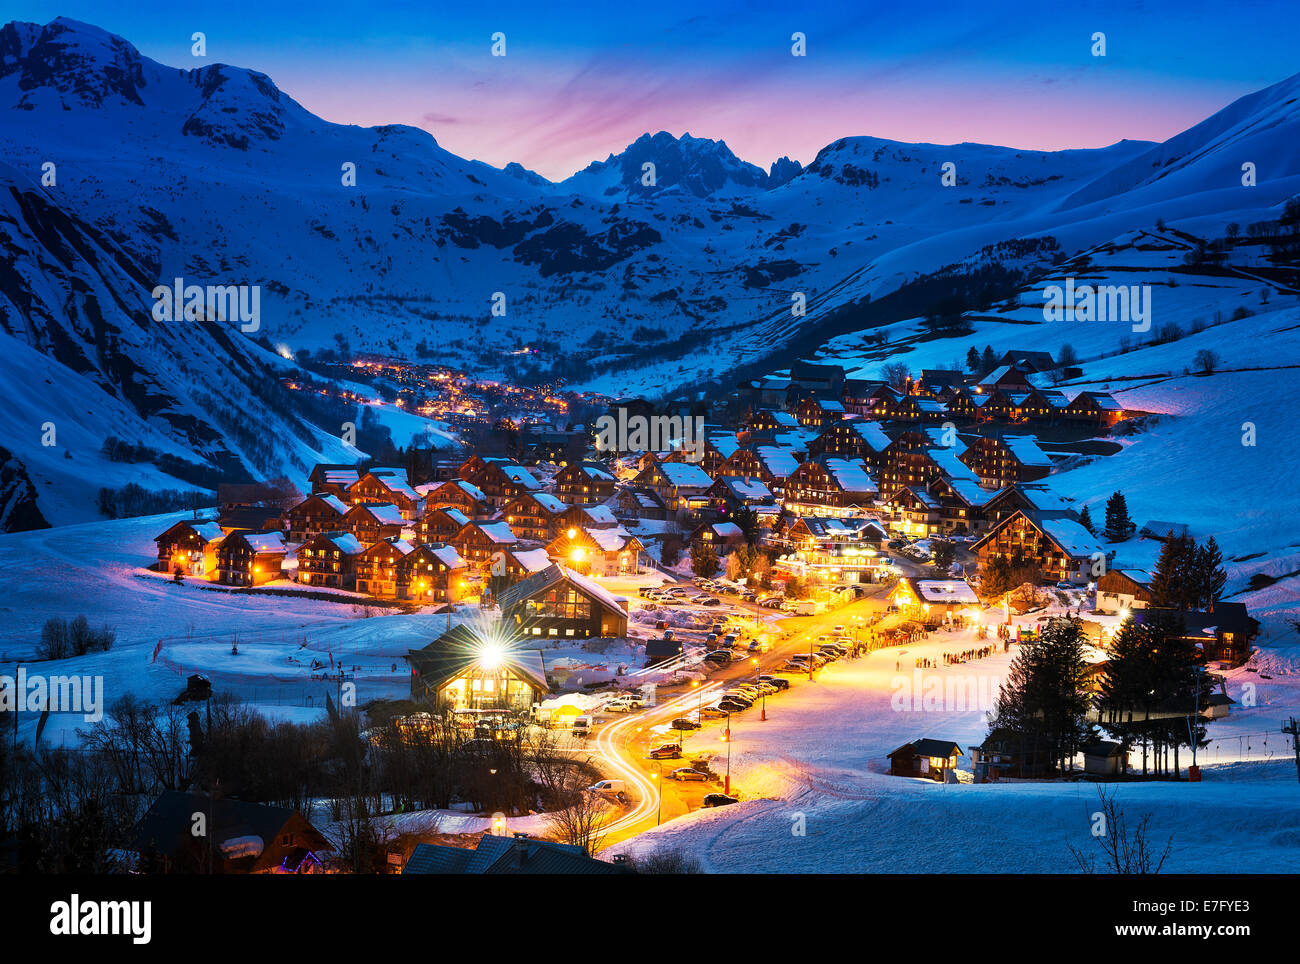 Evening landscape and ski resort in French Alps,Saint jean d'Arves, France Stock Photo